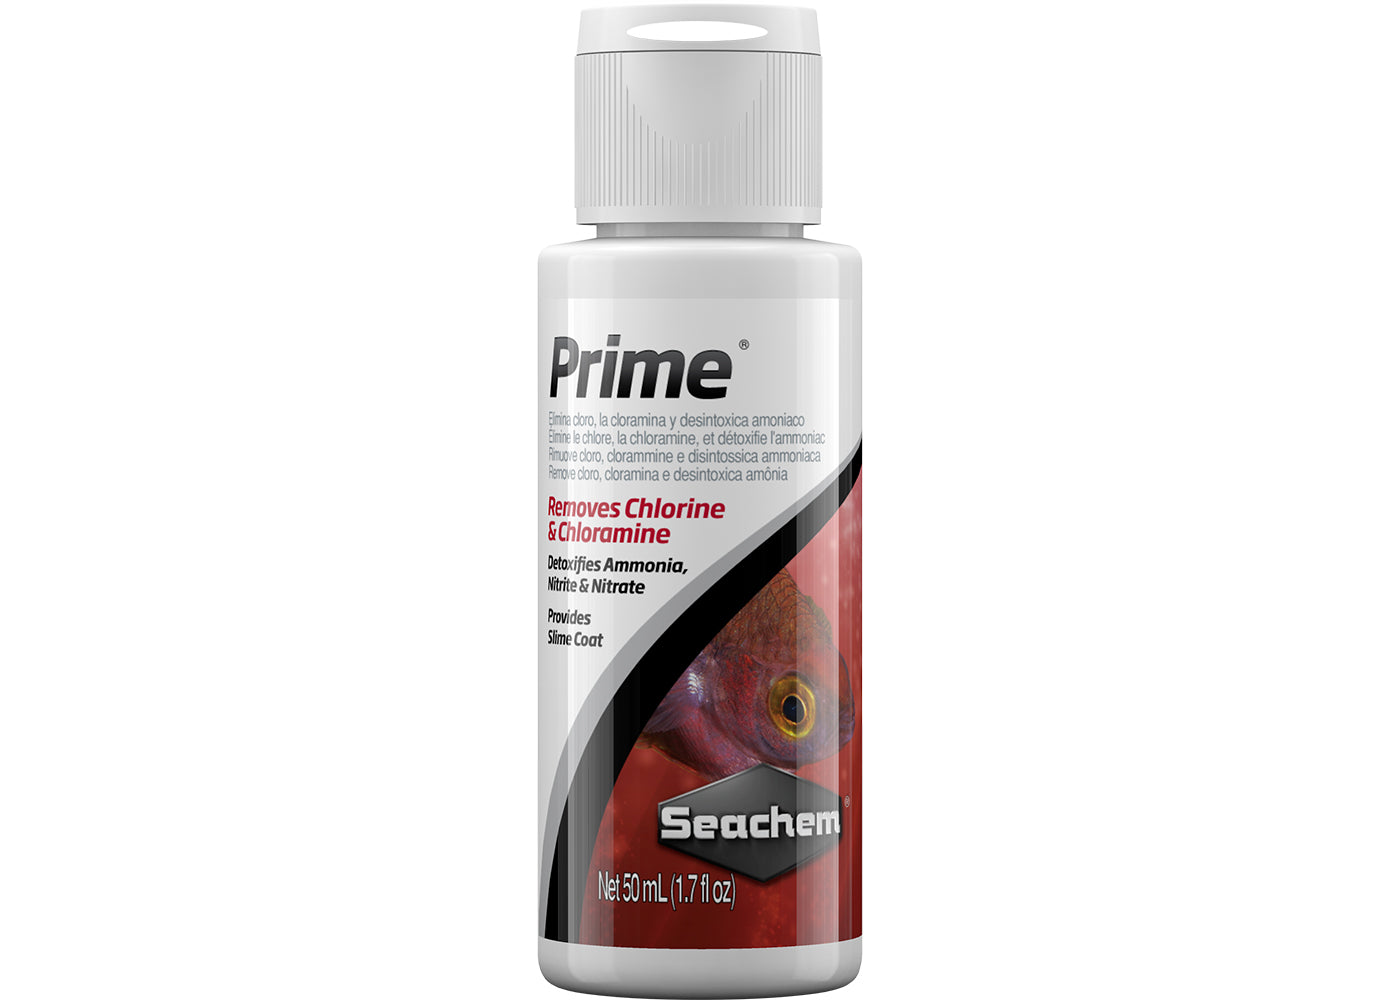 Seachem Prime - white bottle with red branding that reads "Prime, Removes chlorine & Chloramine, Detaxifies Ammonia Nitrate, provides shine coat" net 50 ml